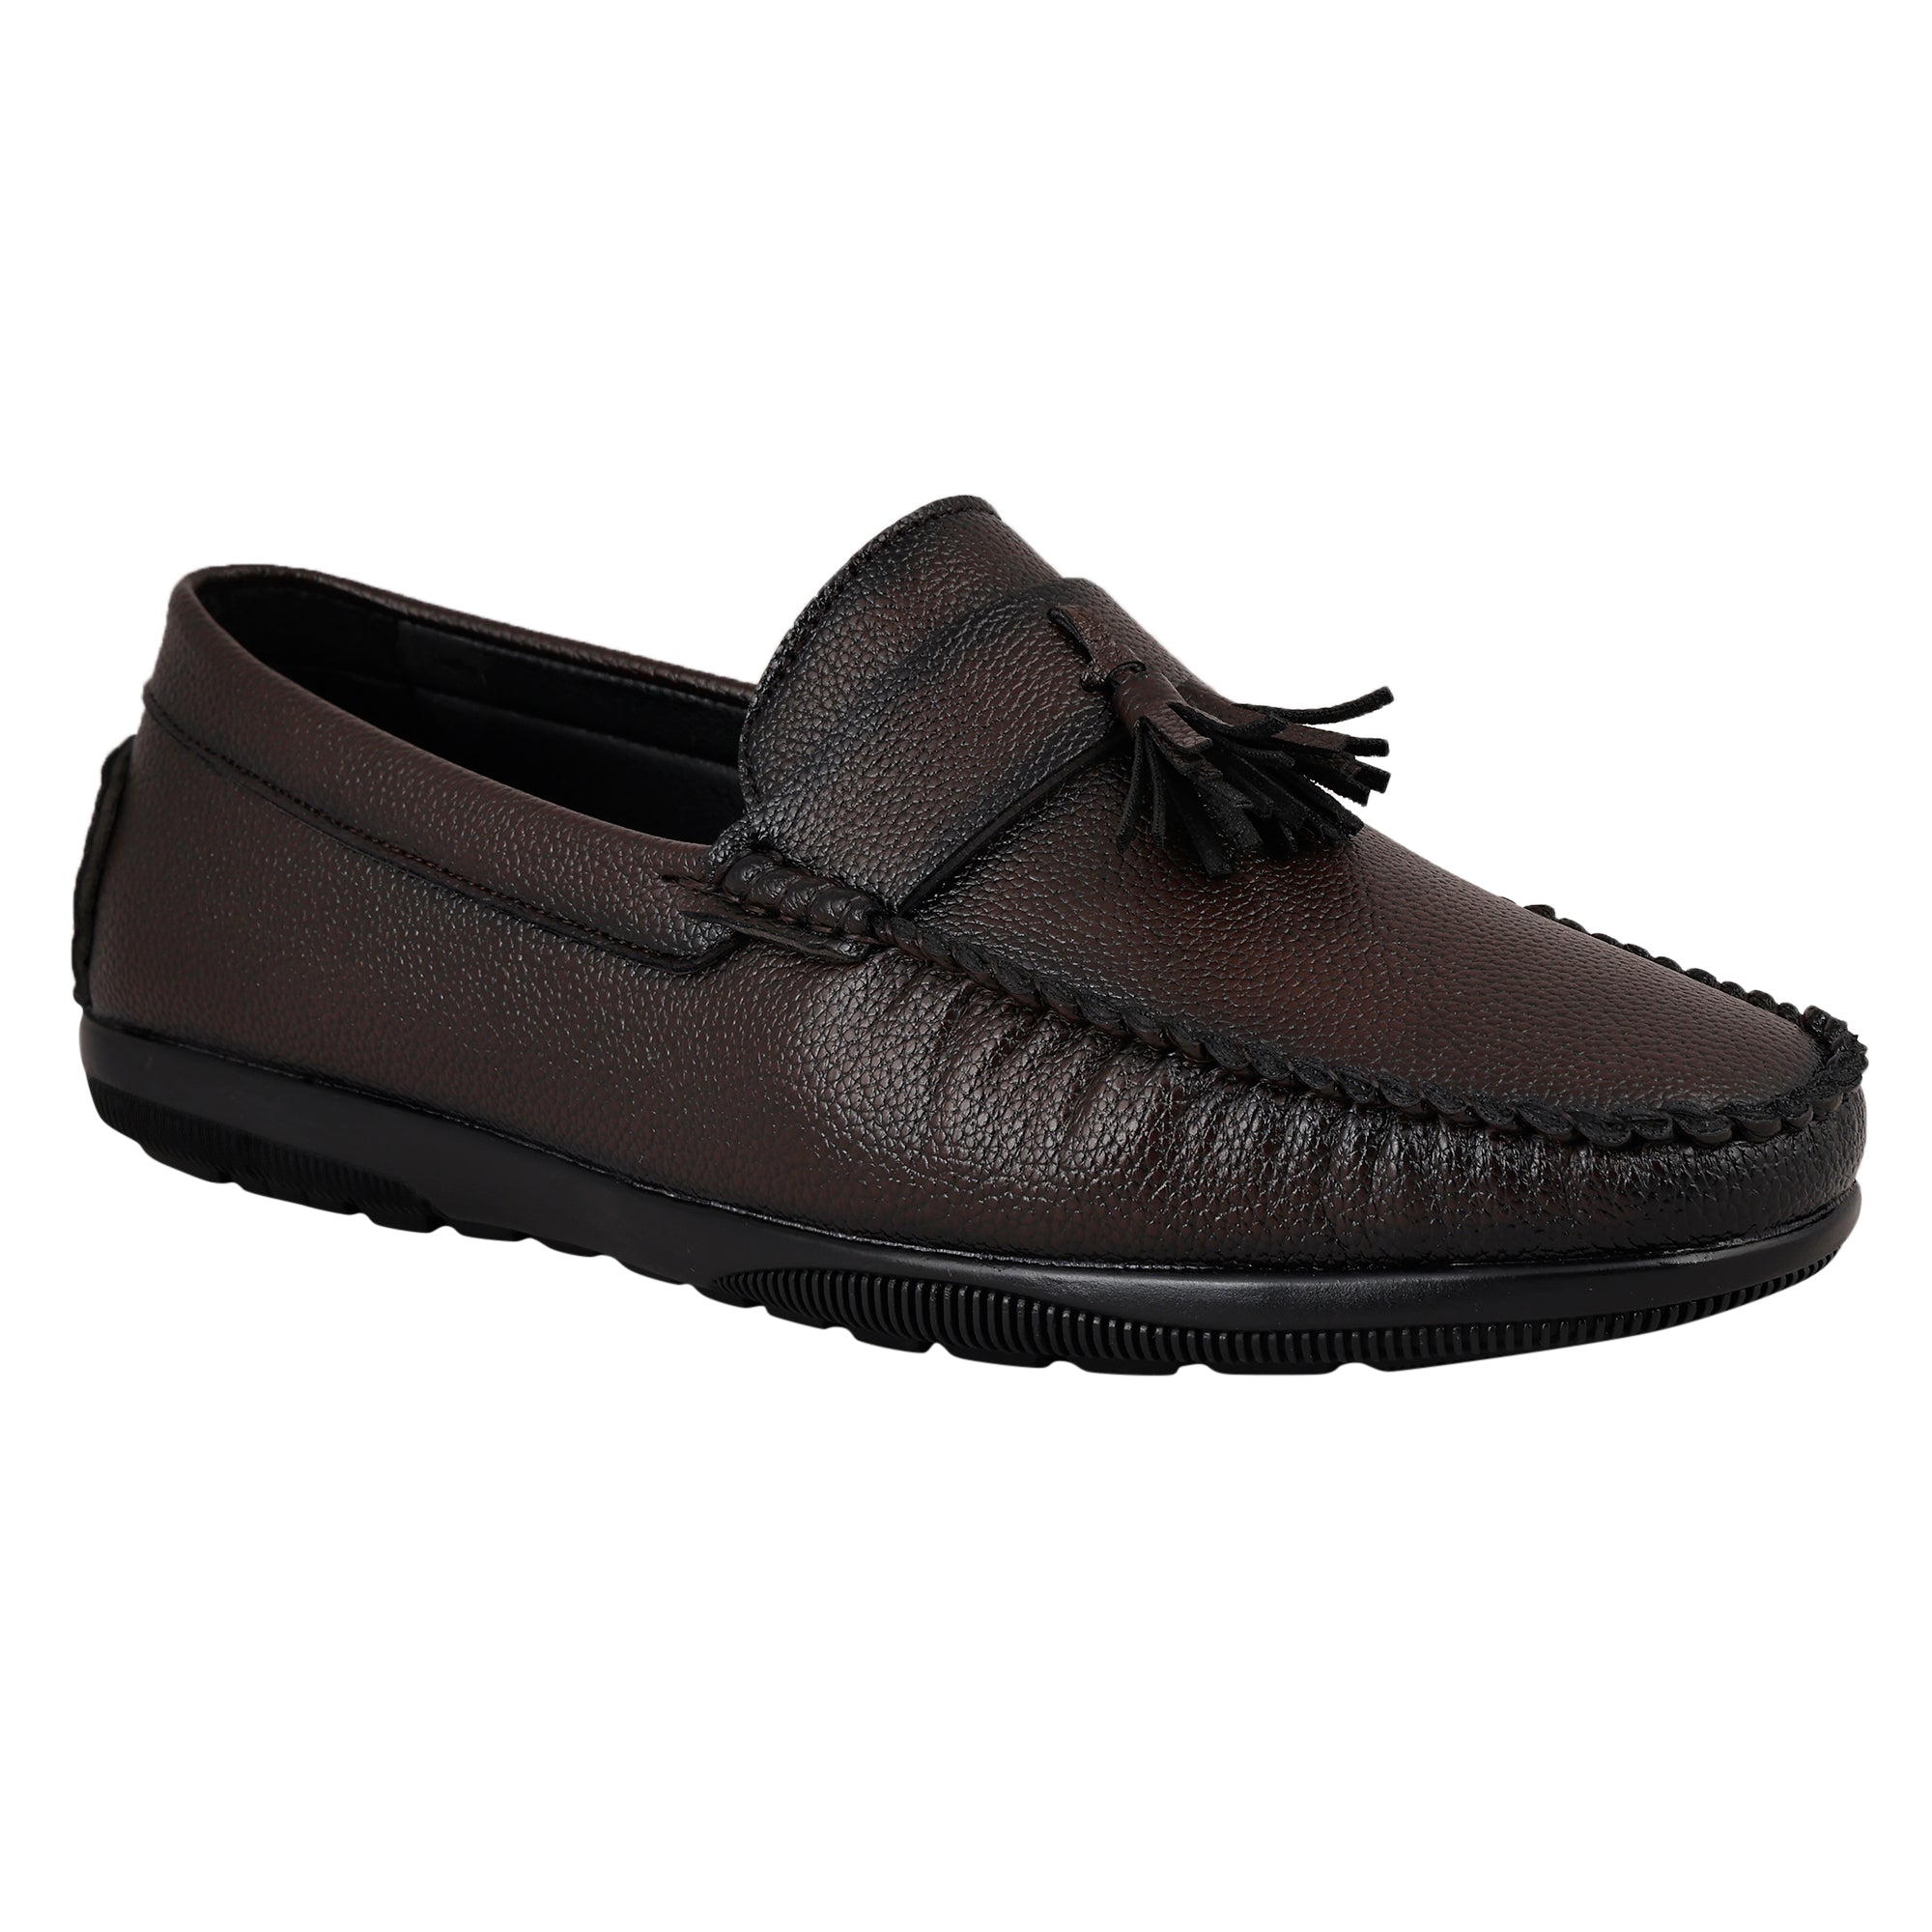 LB 47A Brunette Brown Slip On Style Loafer Most Comfortable Doctor Insole With Wrinkle Free Fox Leather Loafers.